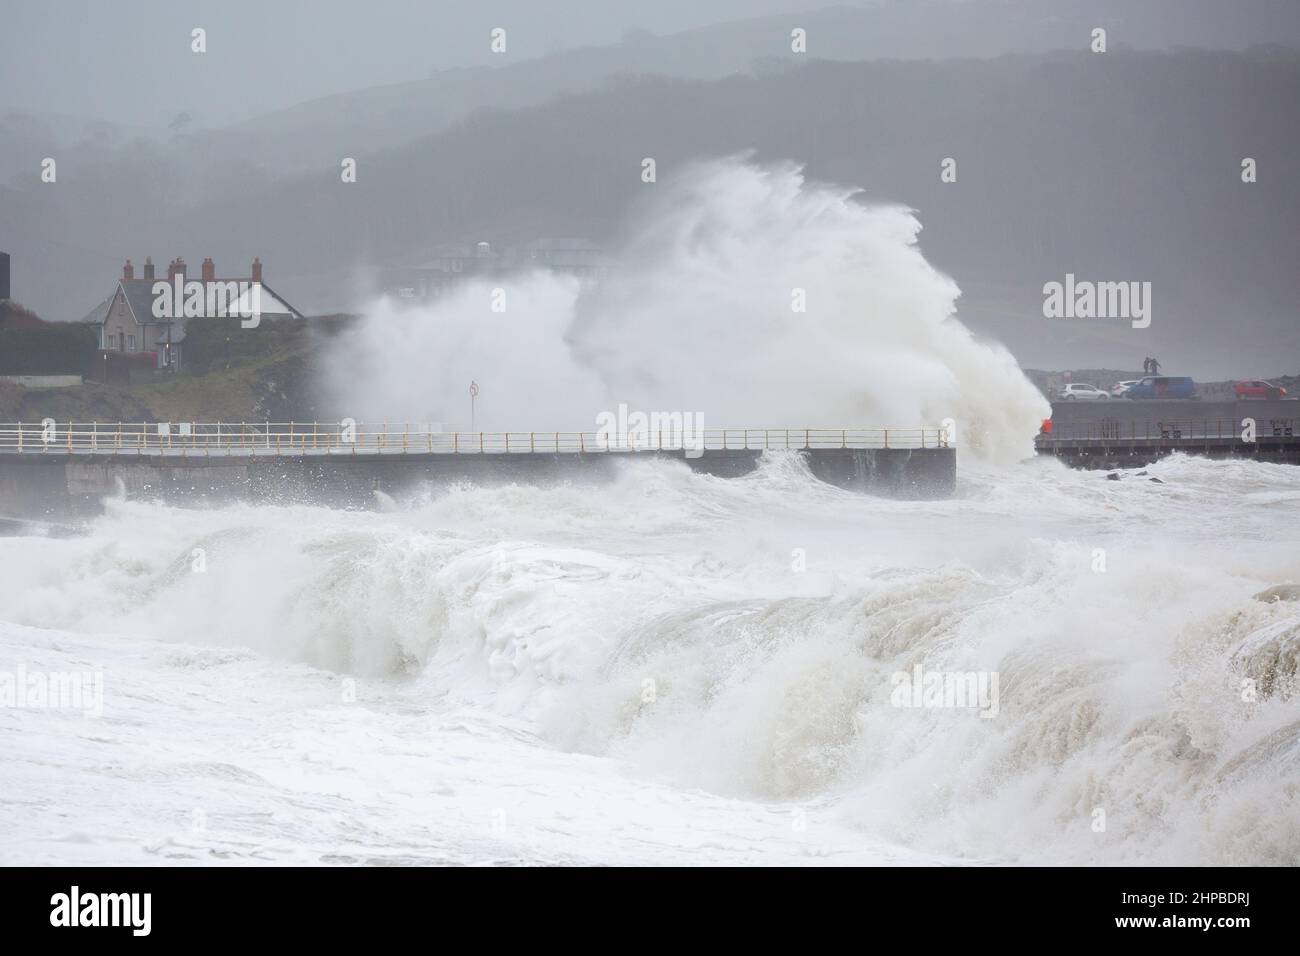 Aberystwyth, Ceredigion, Wales, UK. 20th February 2022  UK Weather: Stormy weather continues along the west coast of Aberystwyth as combining high tide, brings rough seas crashing against the promenade and sea defences. © Ian Jones/Alamy Live News Stock Photo